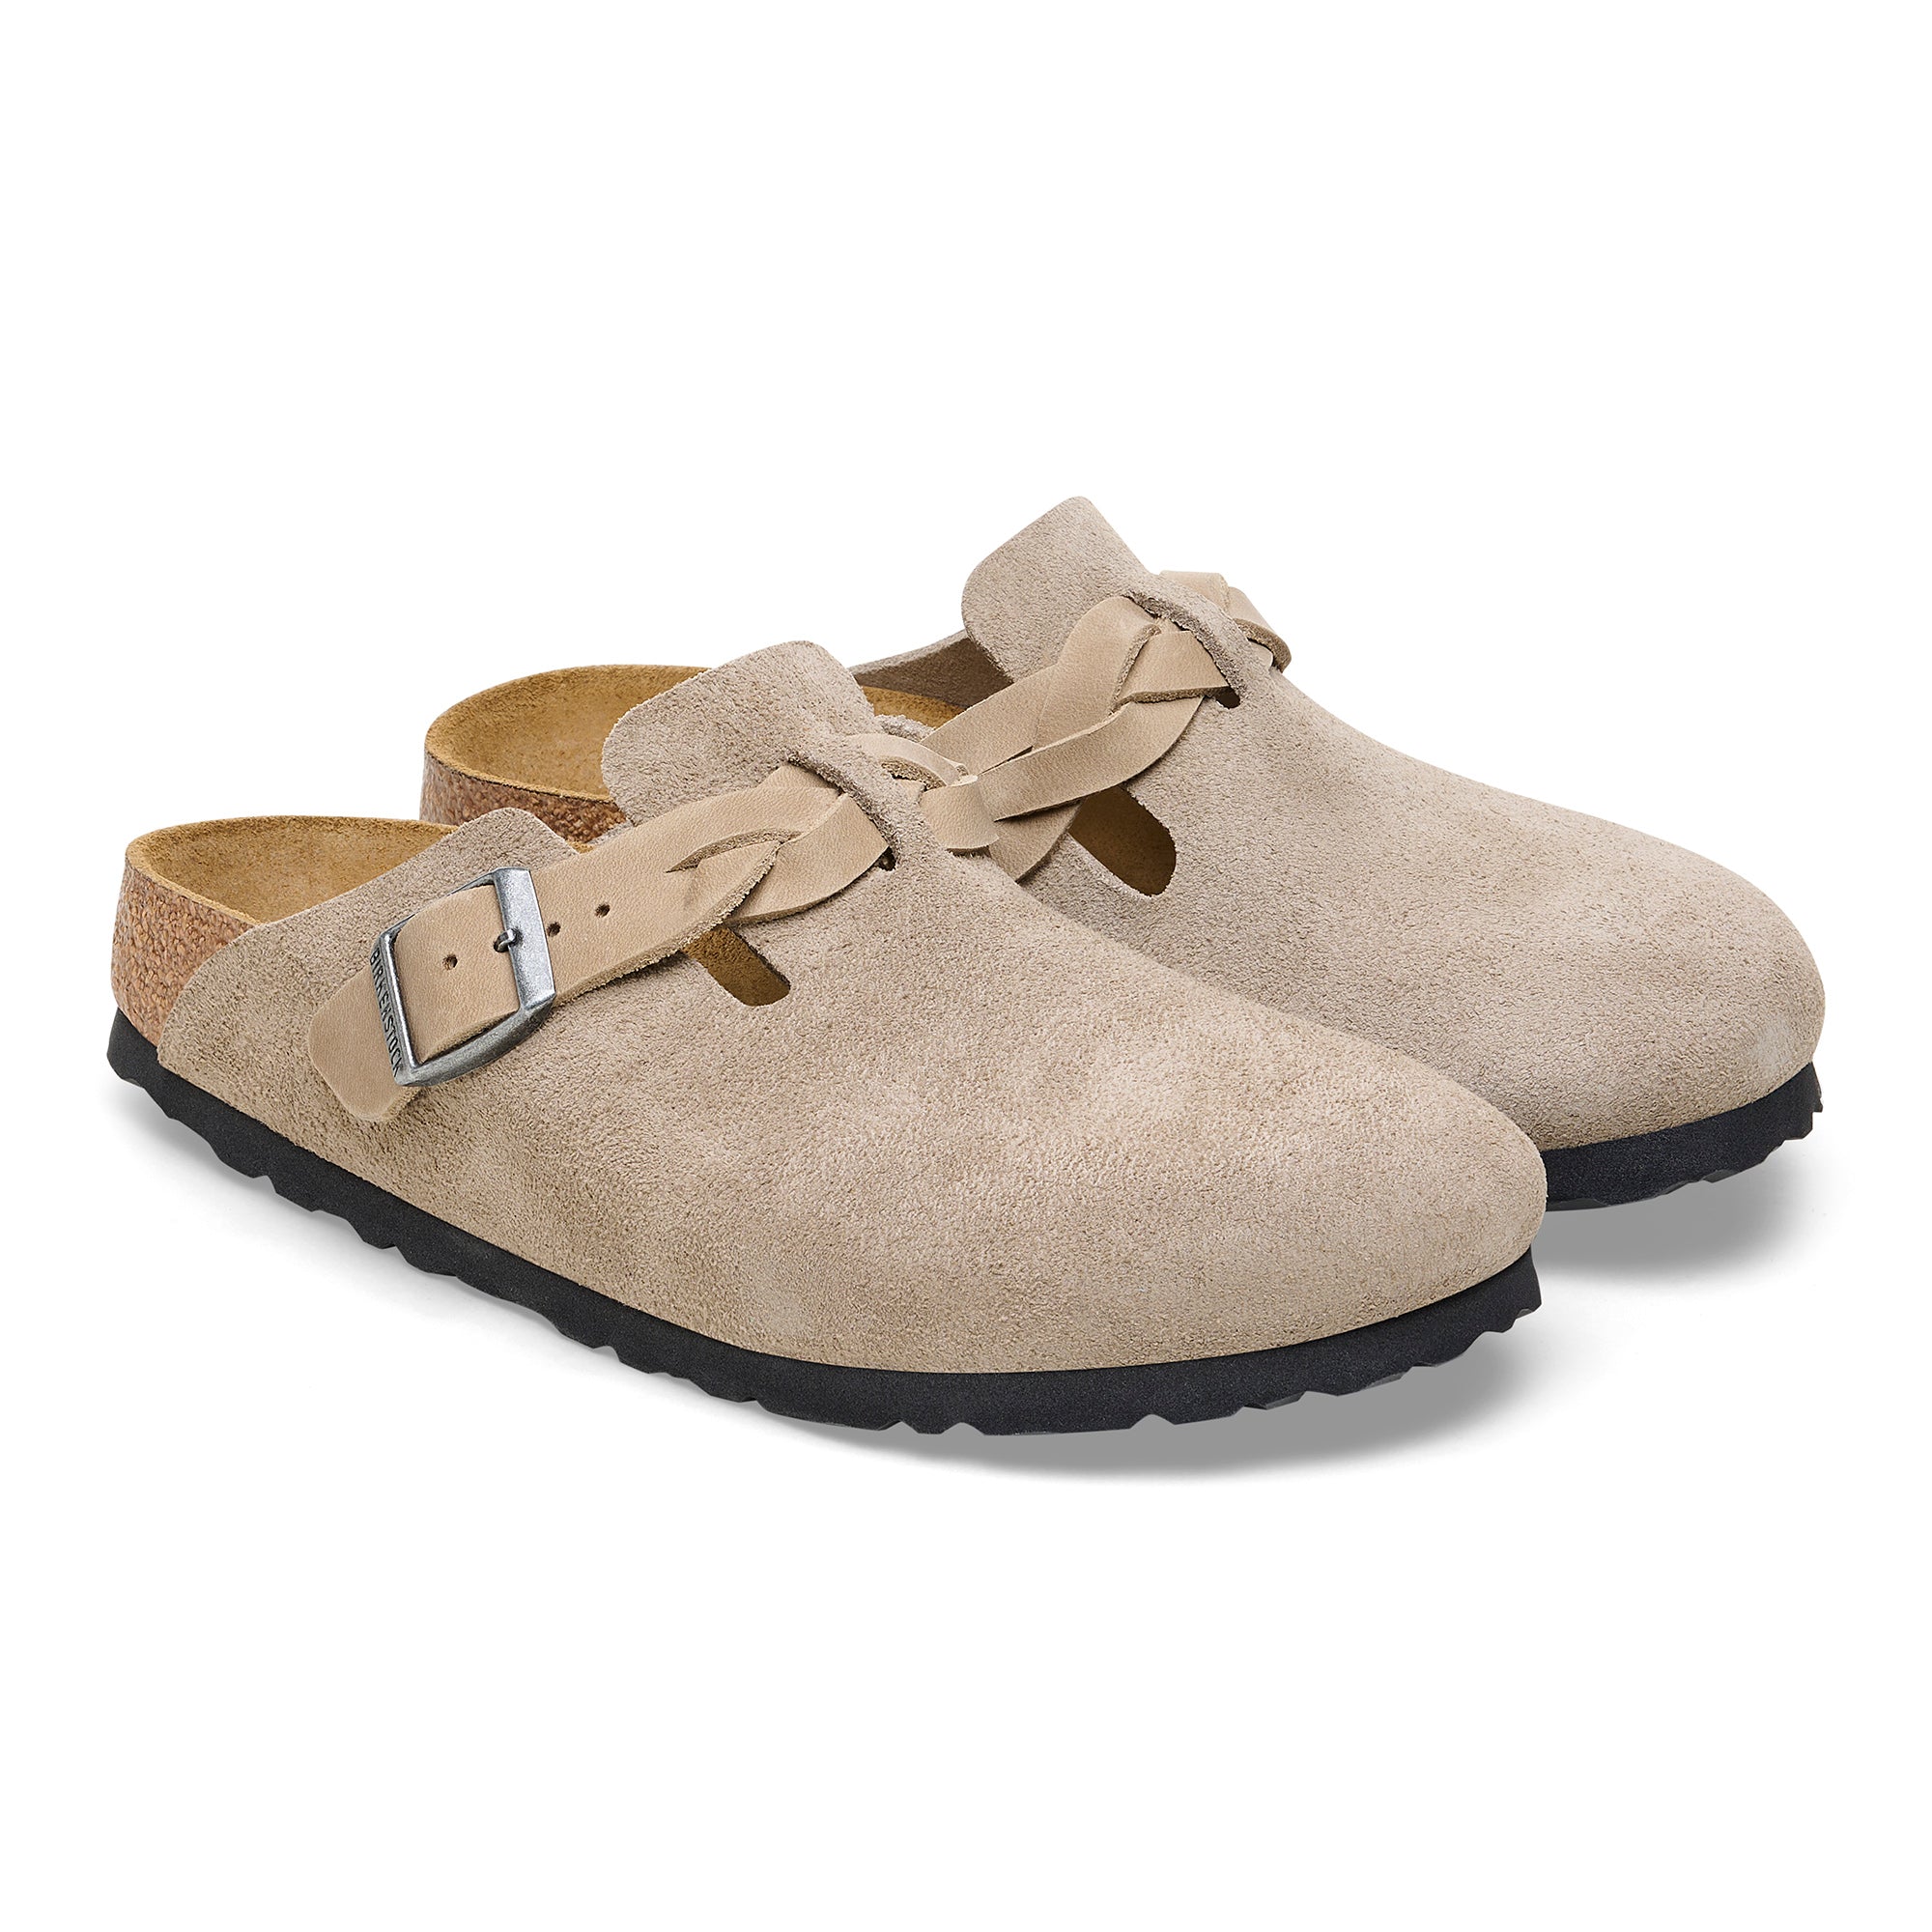 BIRKENSTOCK BOSTON BRAIDED SUEDE LEATHER TAUPE